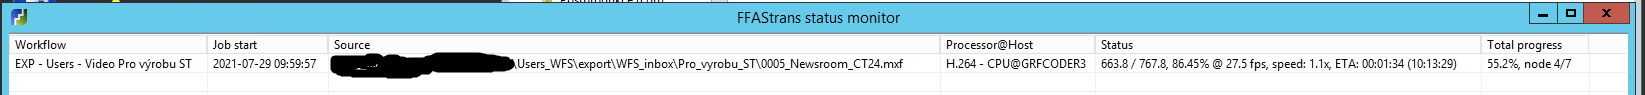 Manually started job - not visible in Status monitor.PNG